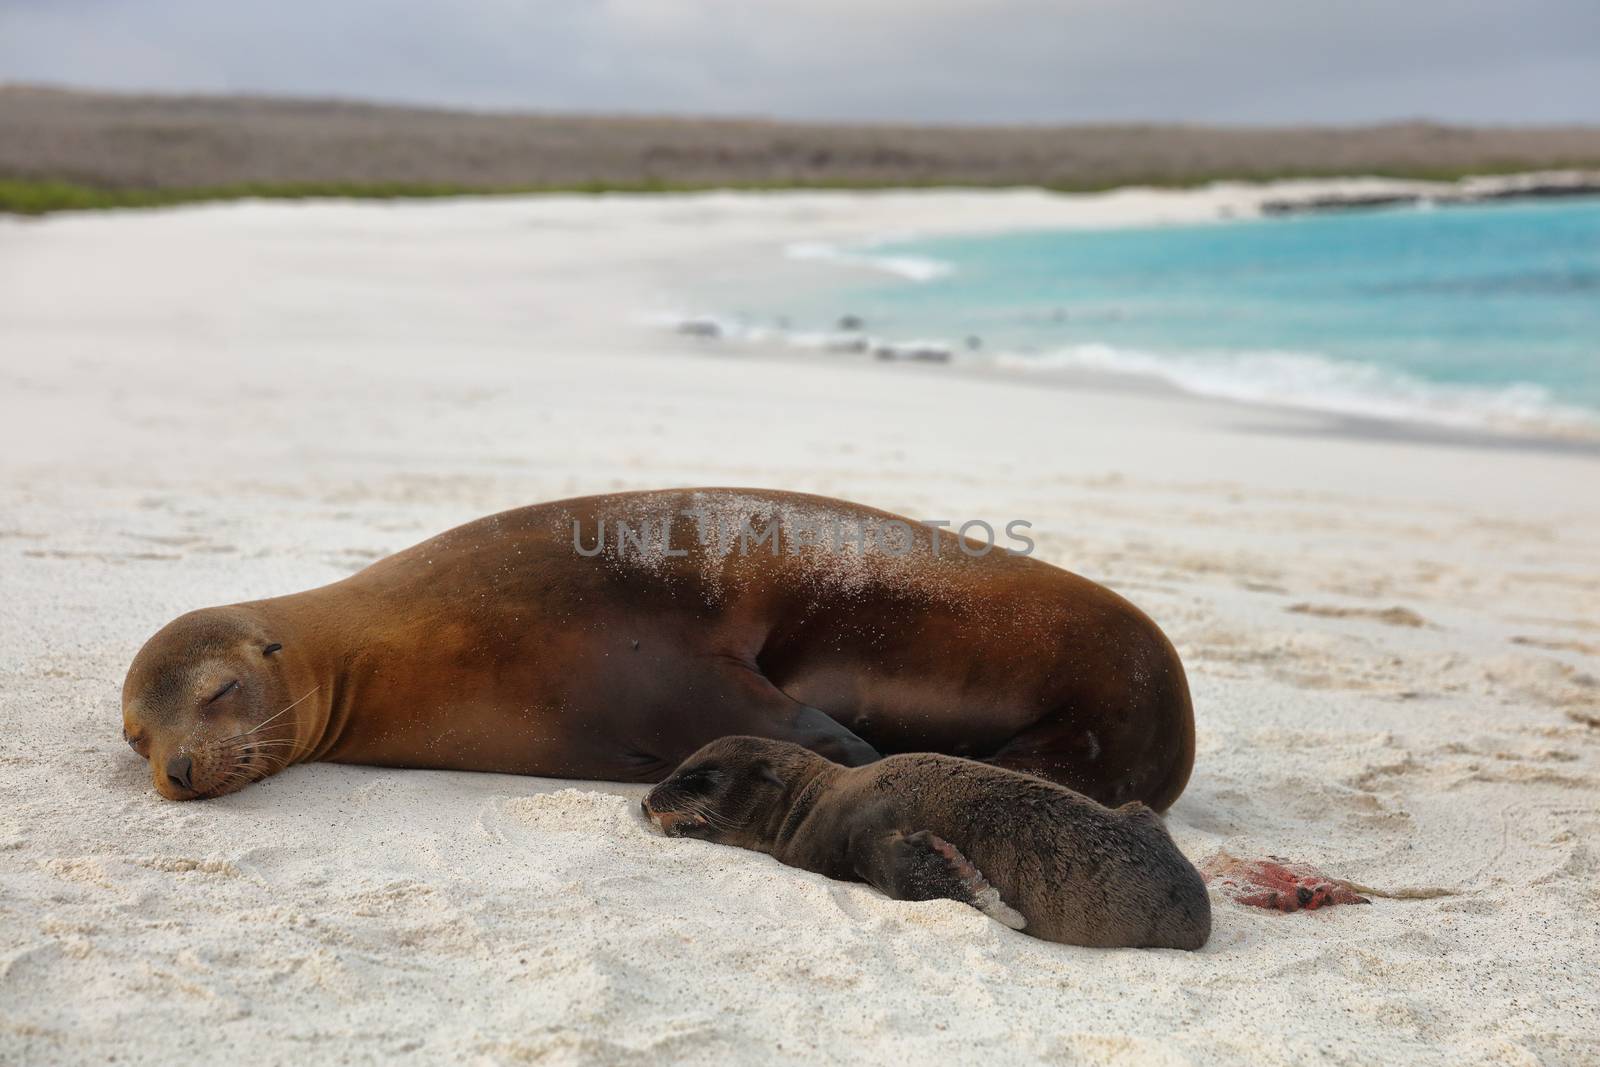 Galapagos islands animals newborn baby sea lion pup right after birth by mother by Maridav